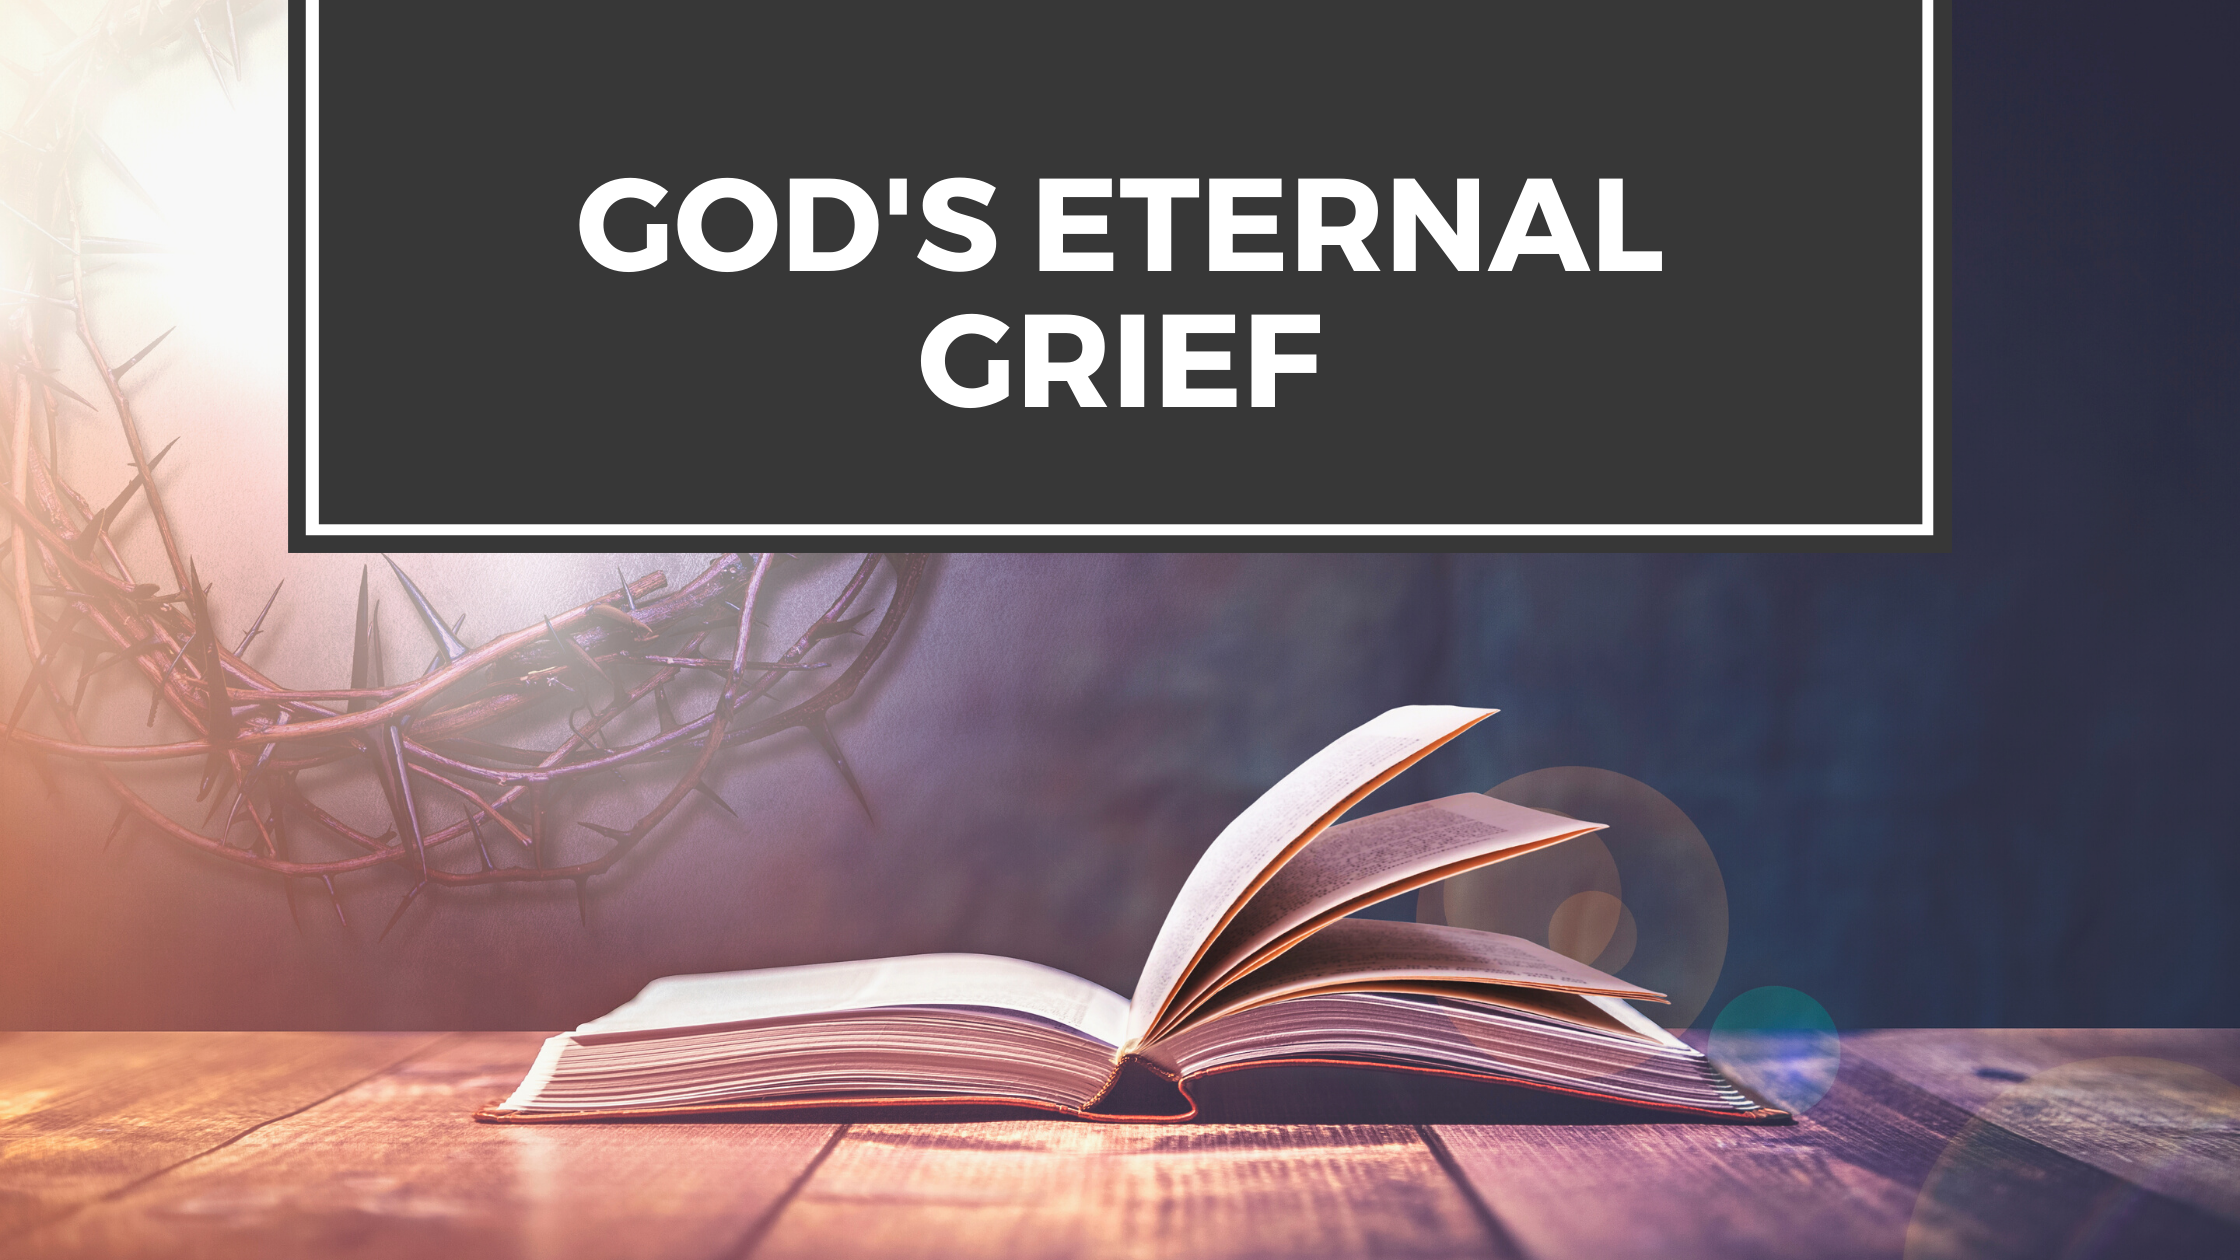 God's Eternal Grief title with Bible and crown of thorns in background